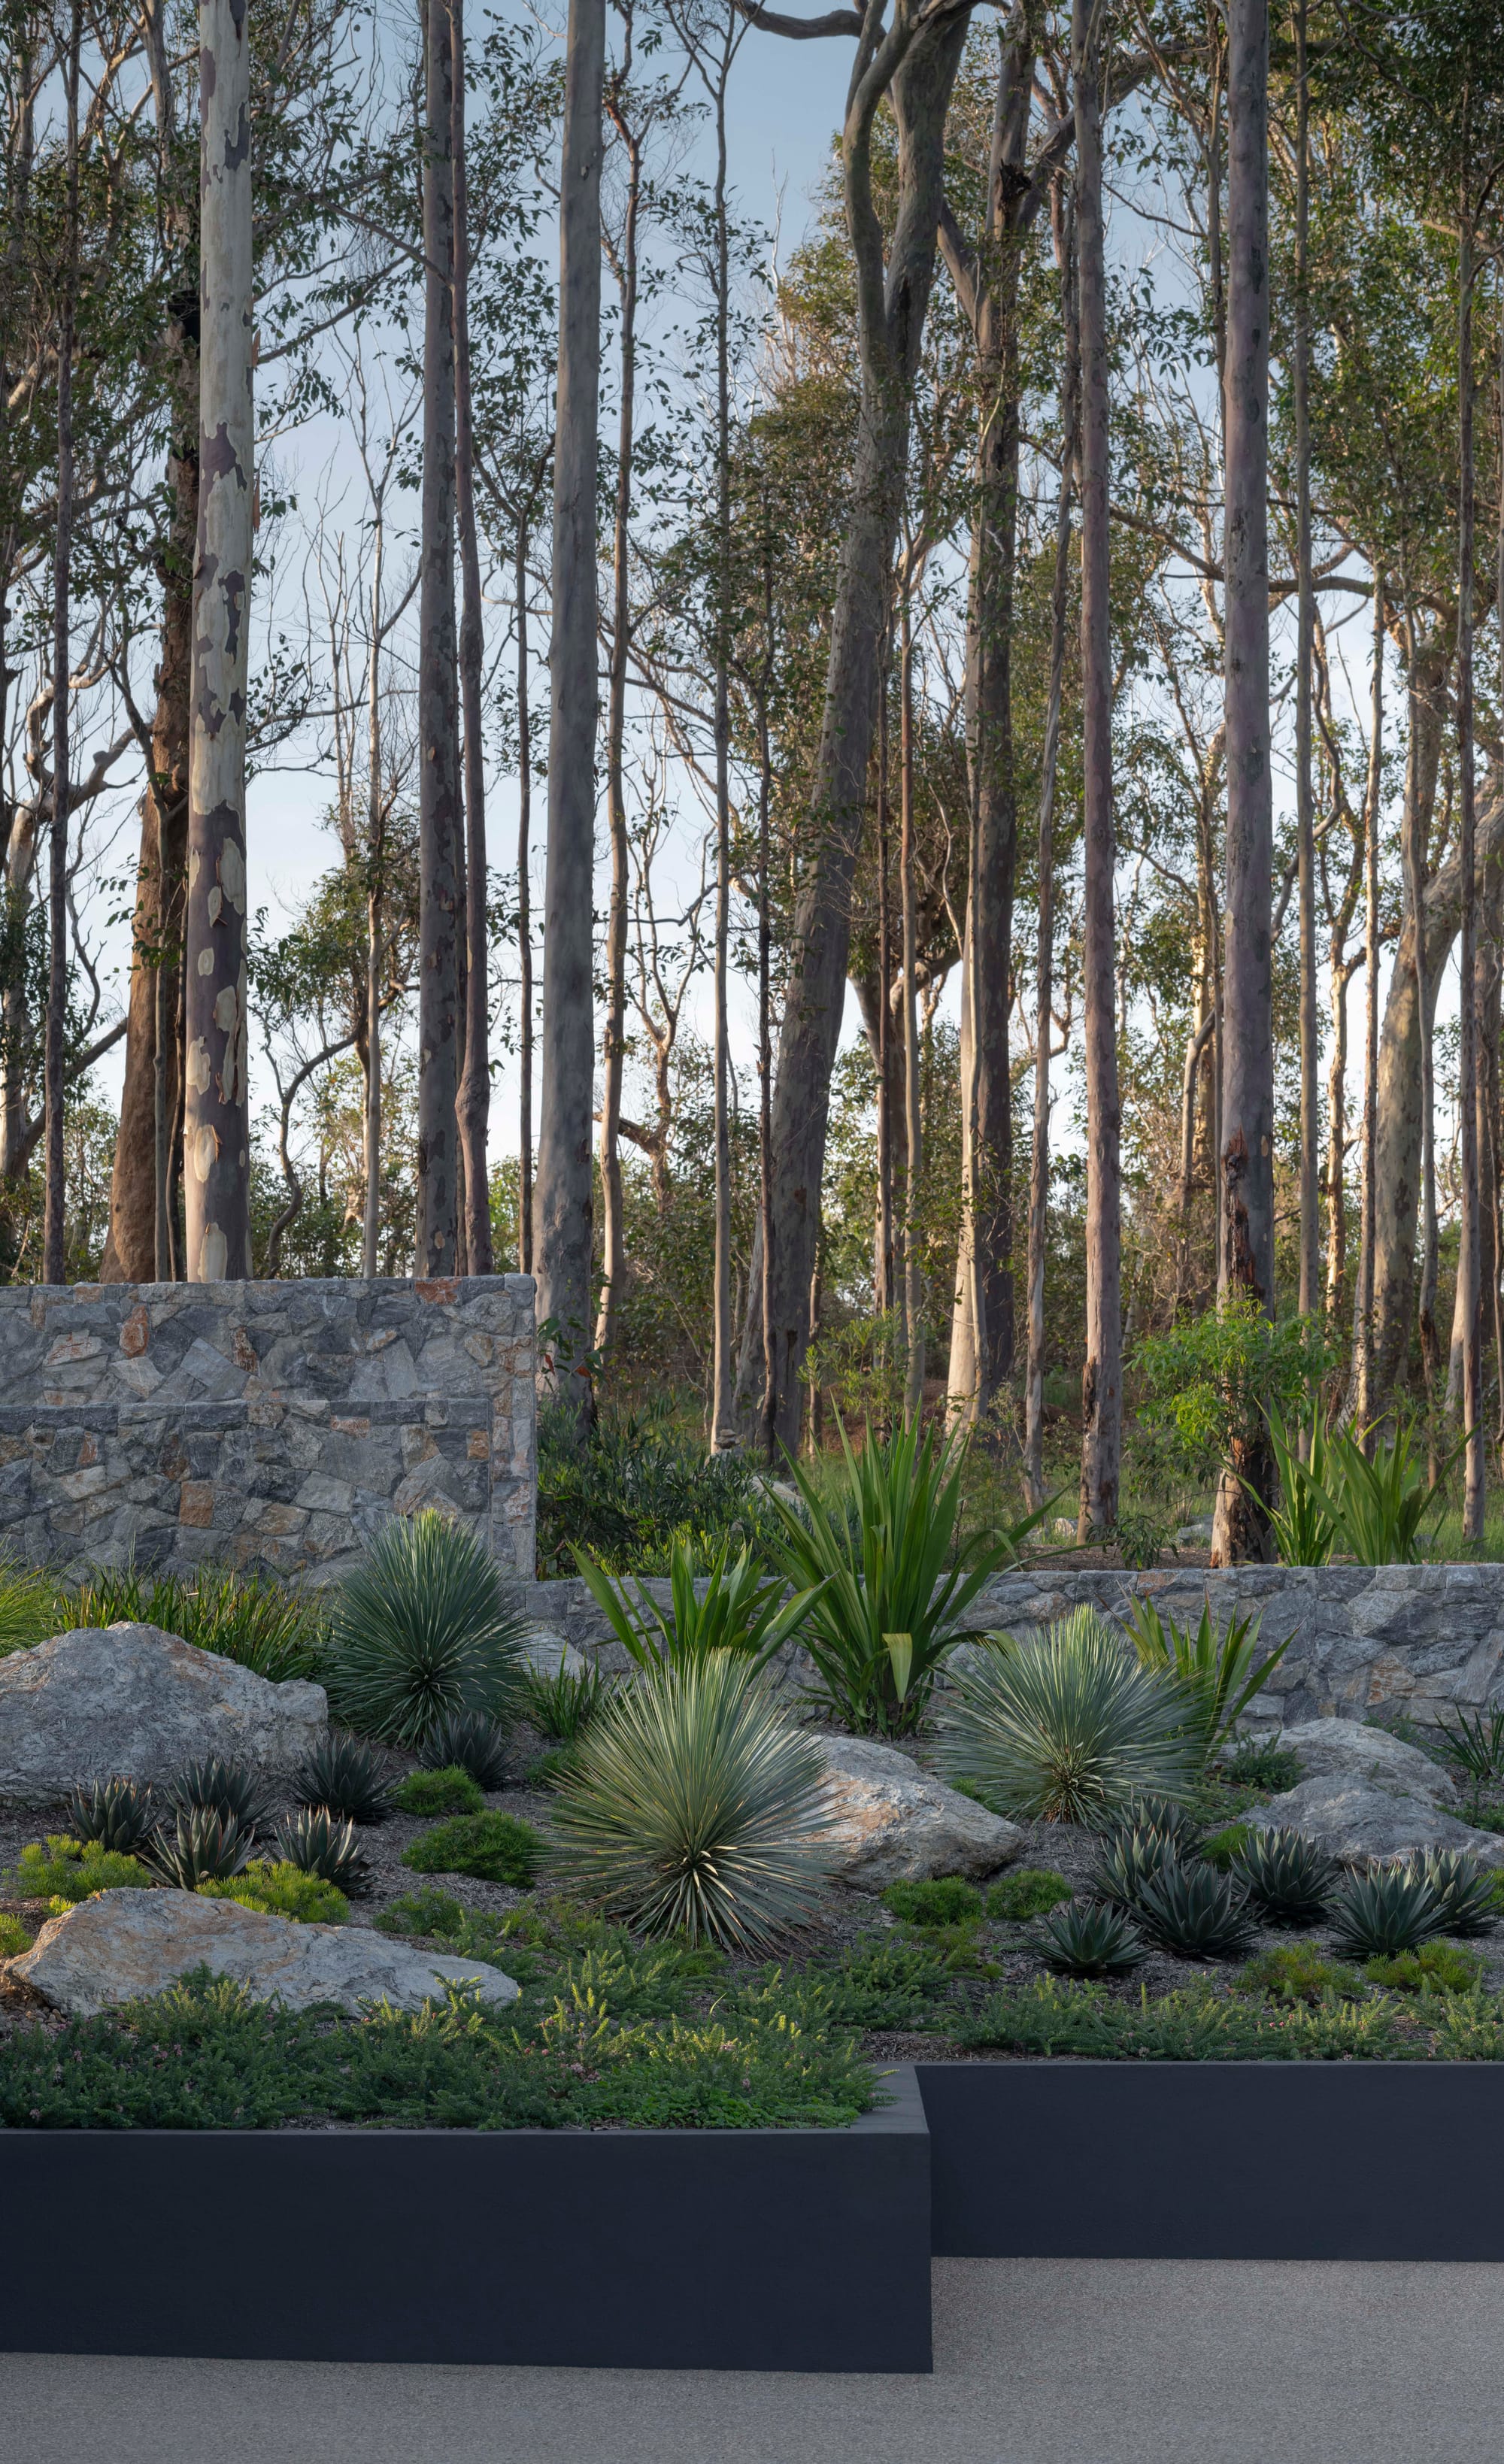 Bracken by Secret Gardens. Photography by Nicholas Watt. Elevated garden bed with low-lying Australian native flora and rocks. Tall gum trees in background, behind stone wall.